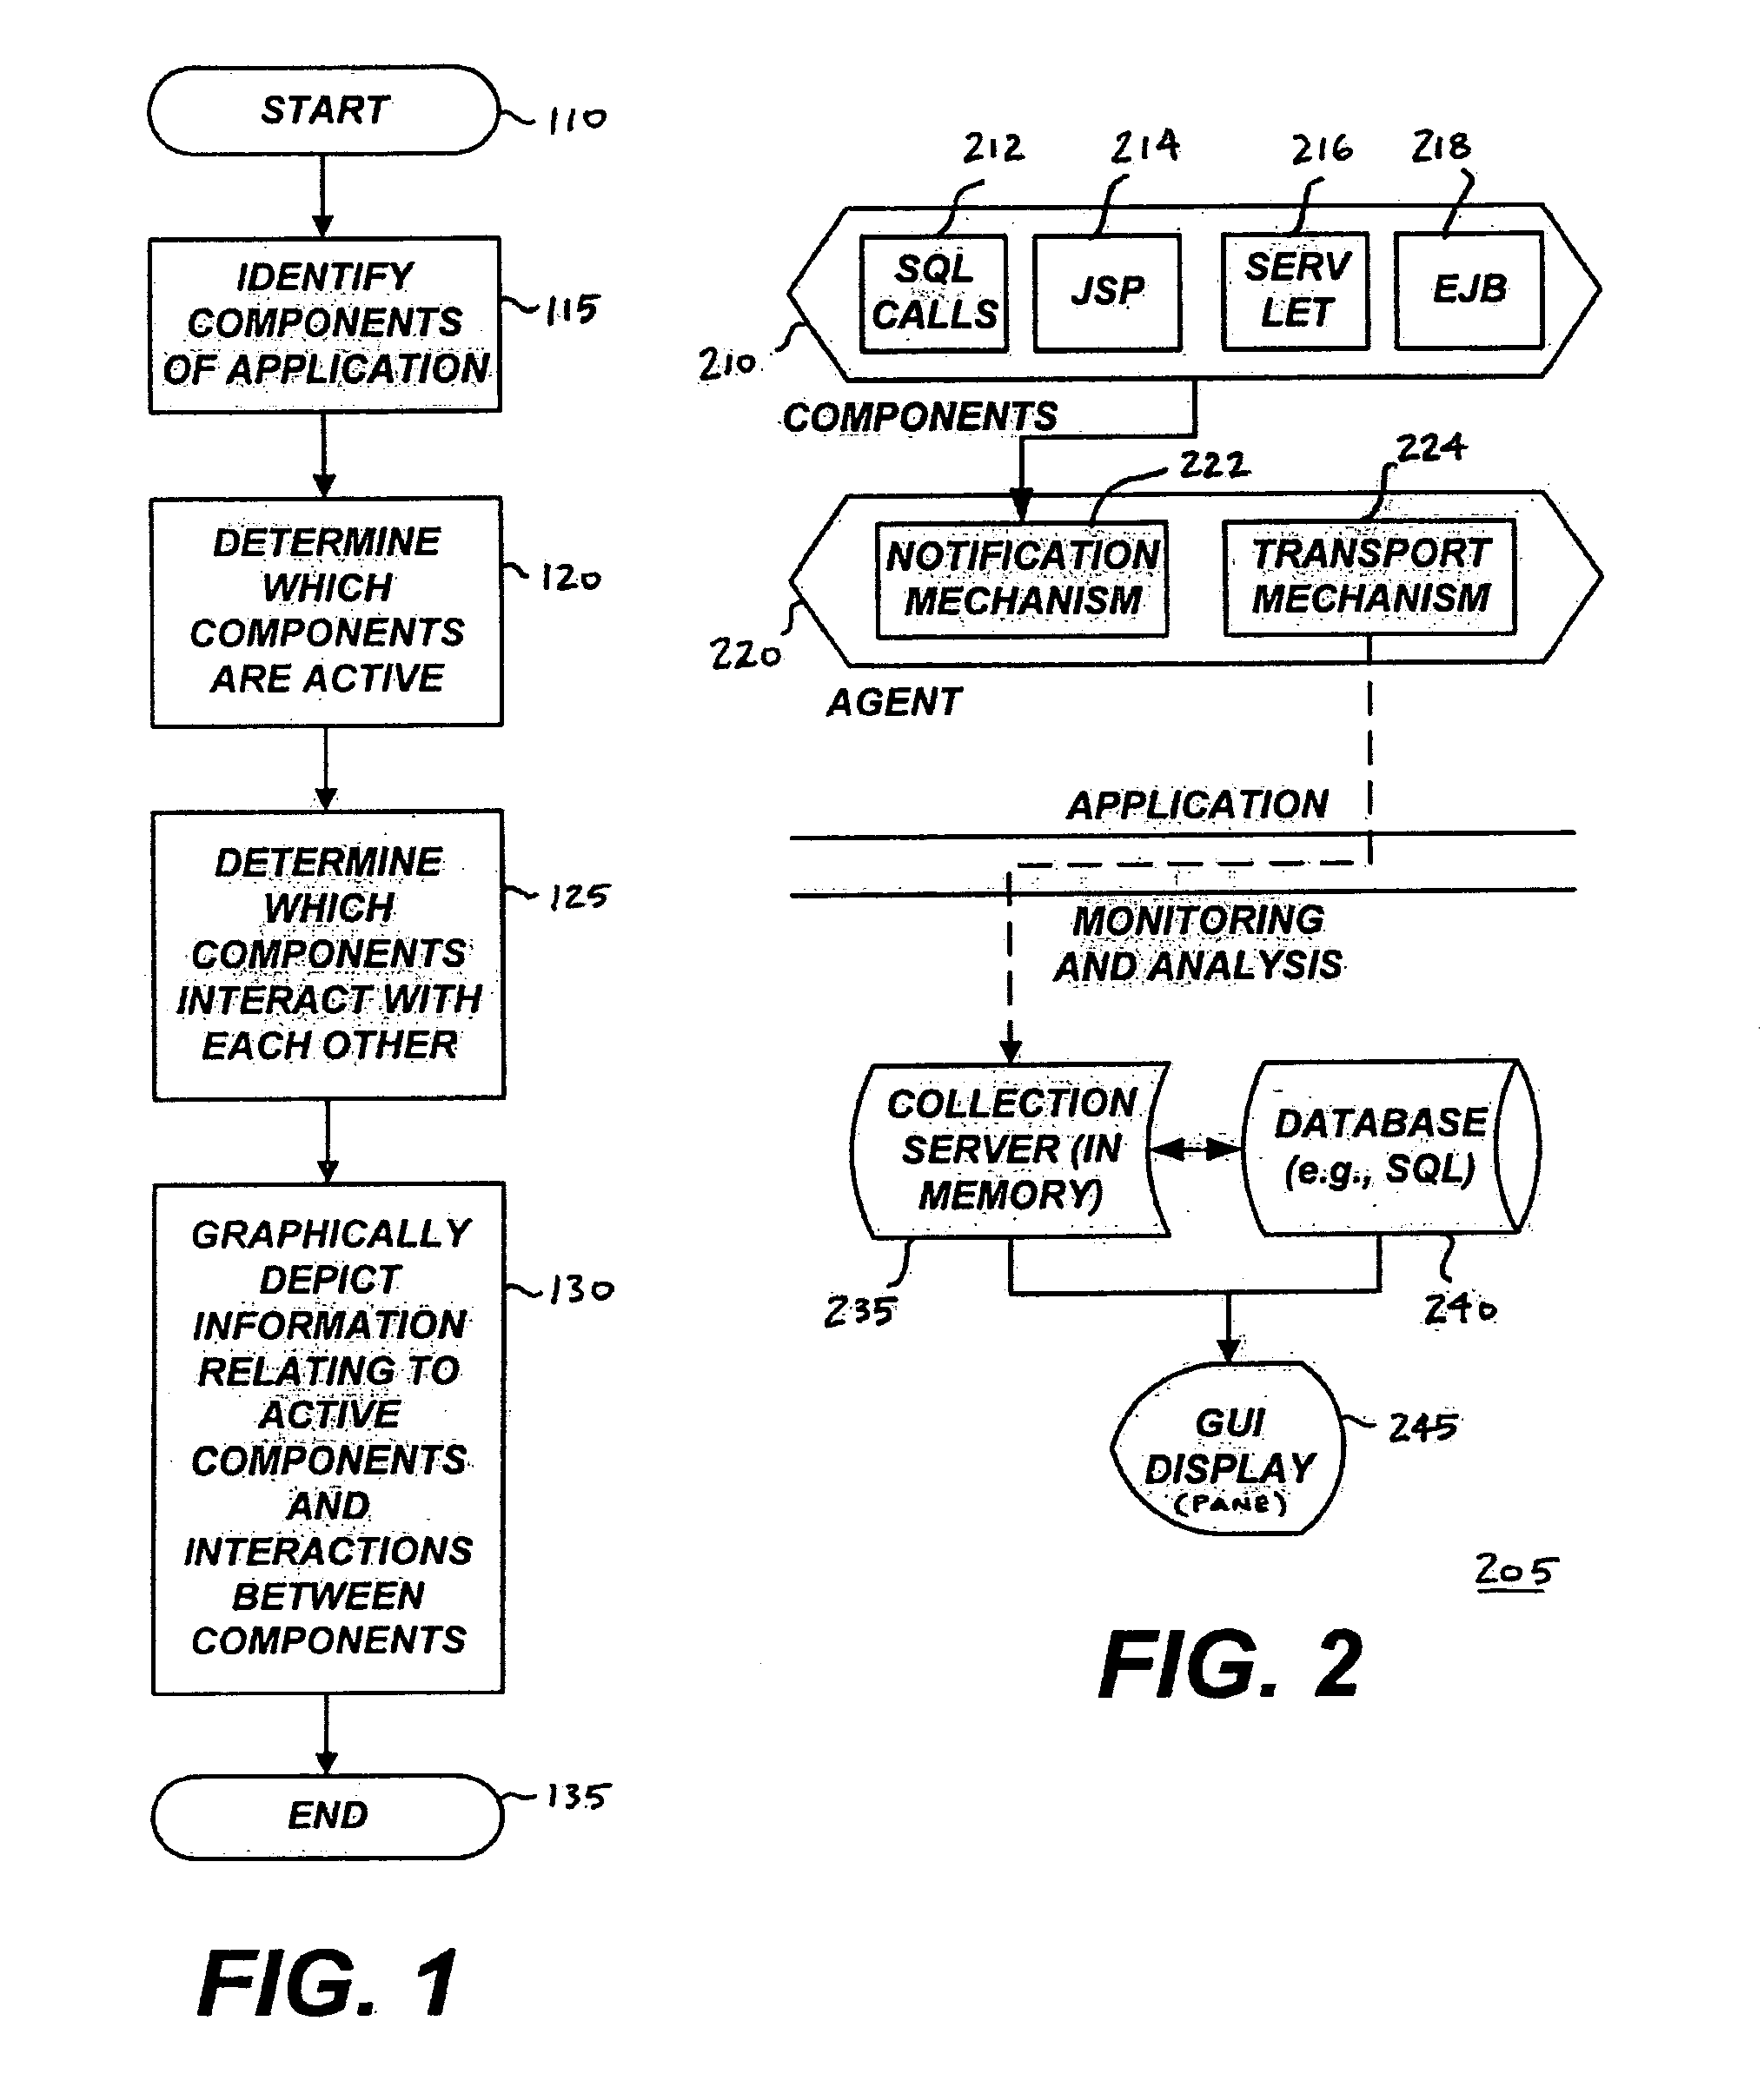 Visual landscape for multi-tiered application environment component interactions